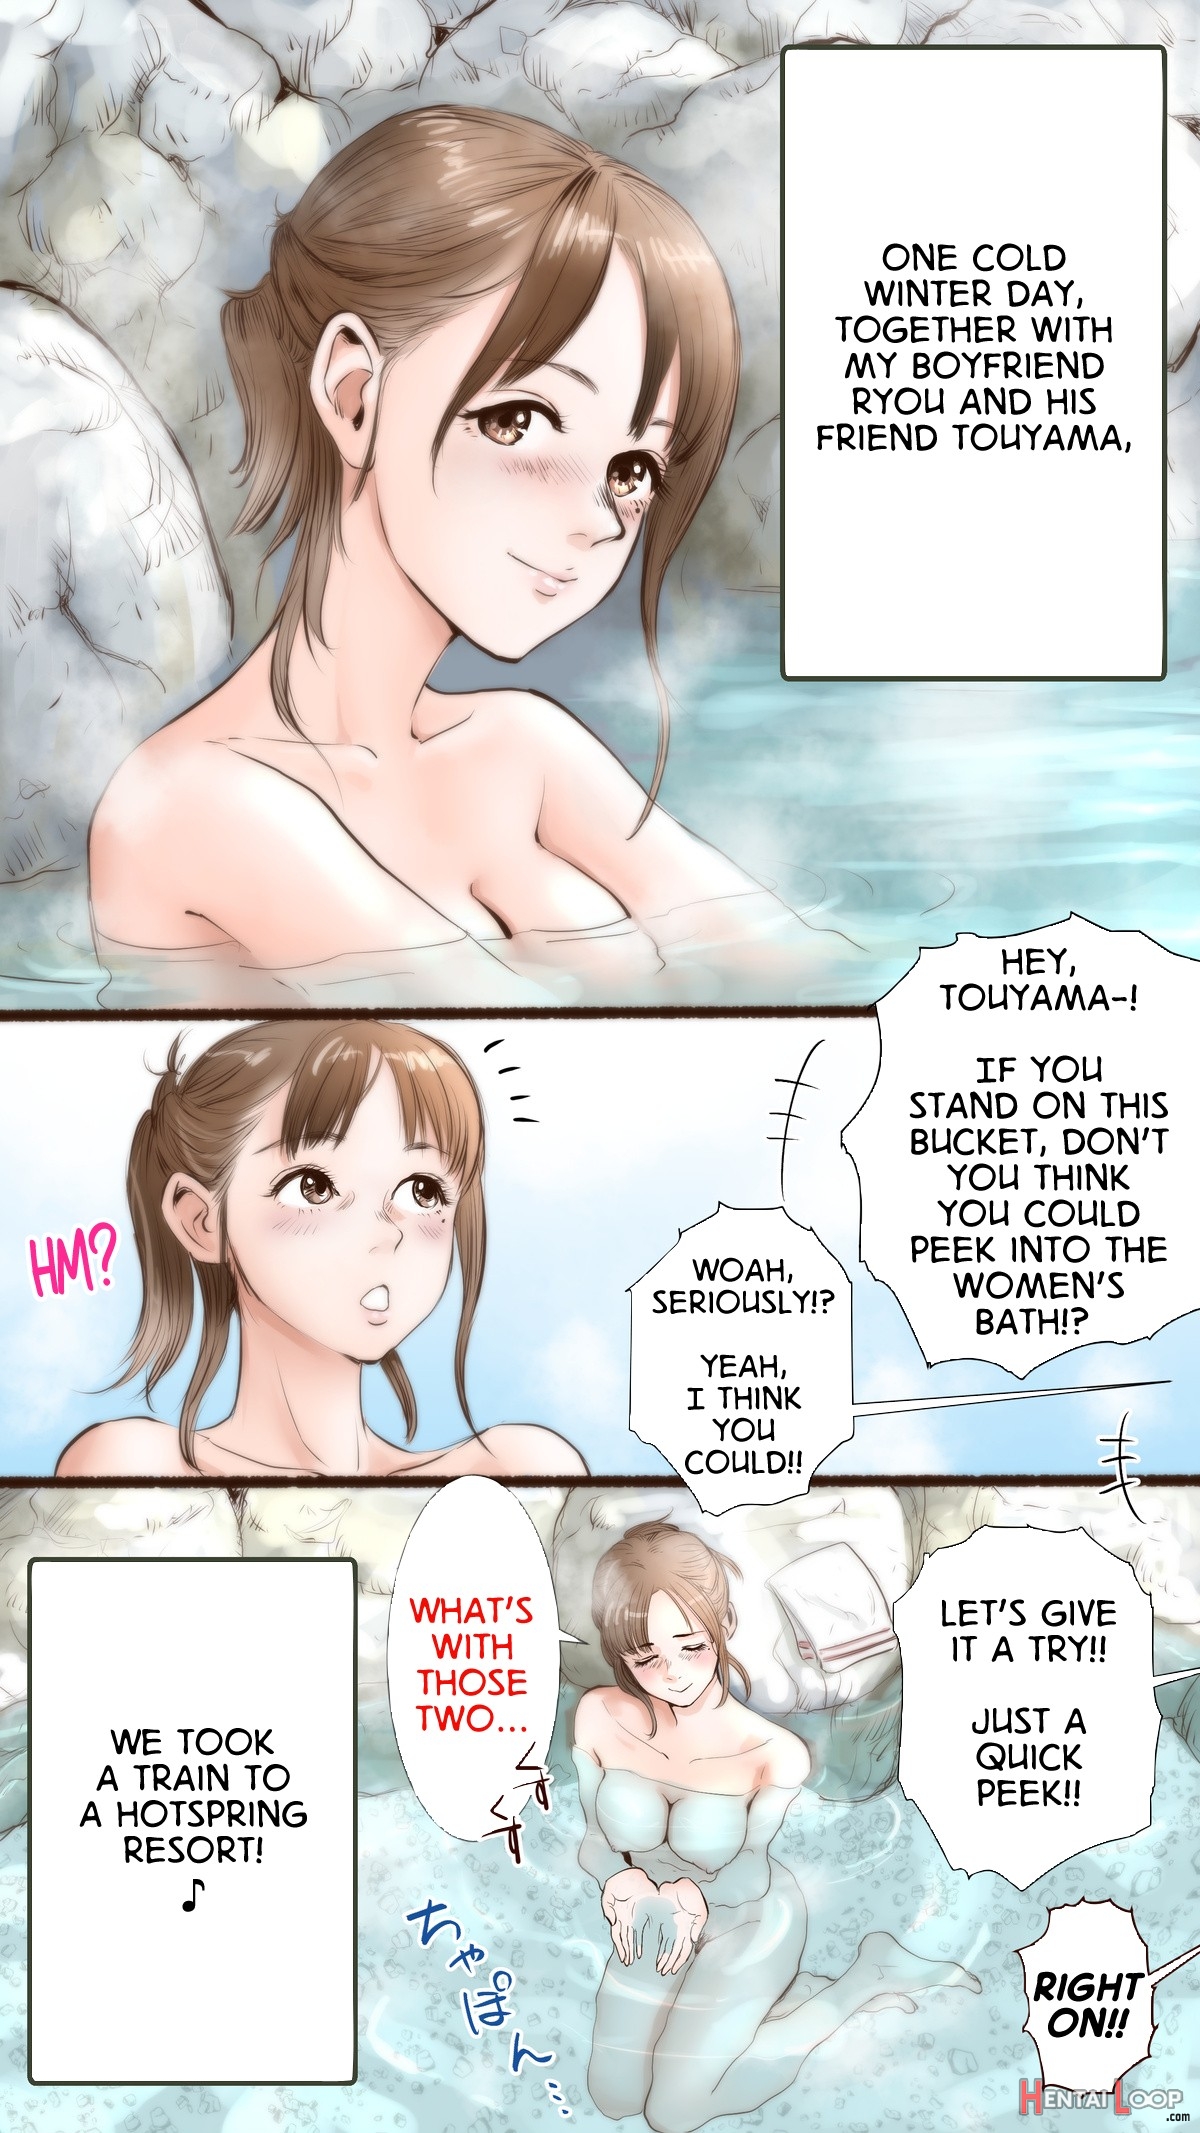 Hot Spring Inn Story page 1